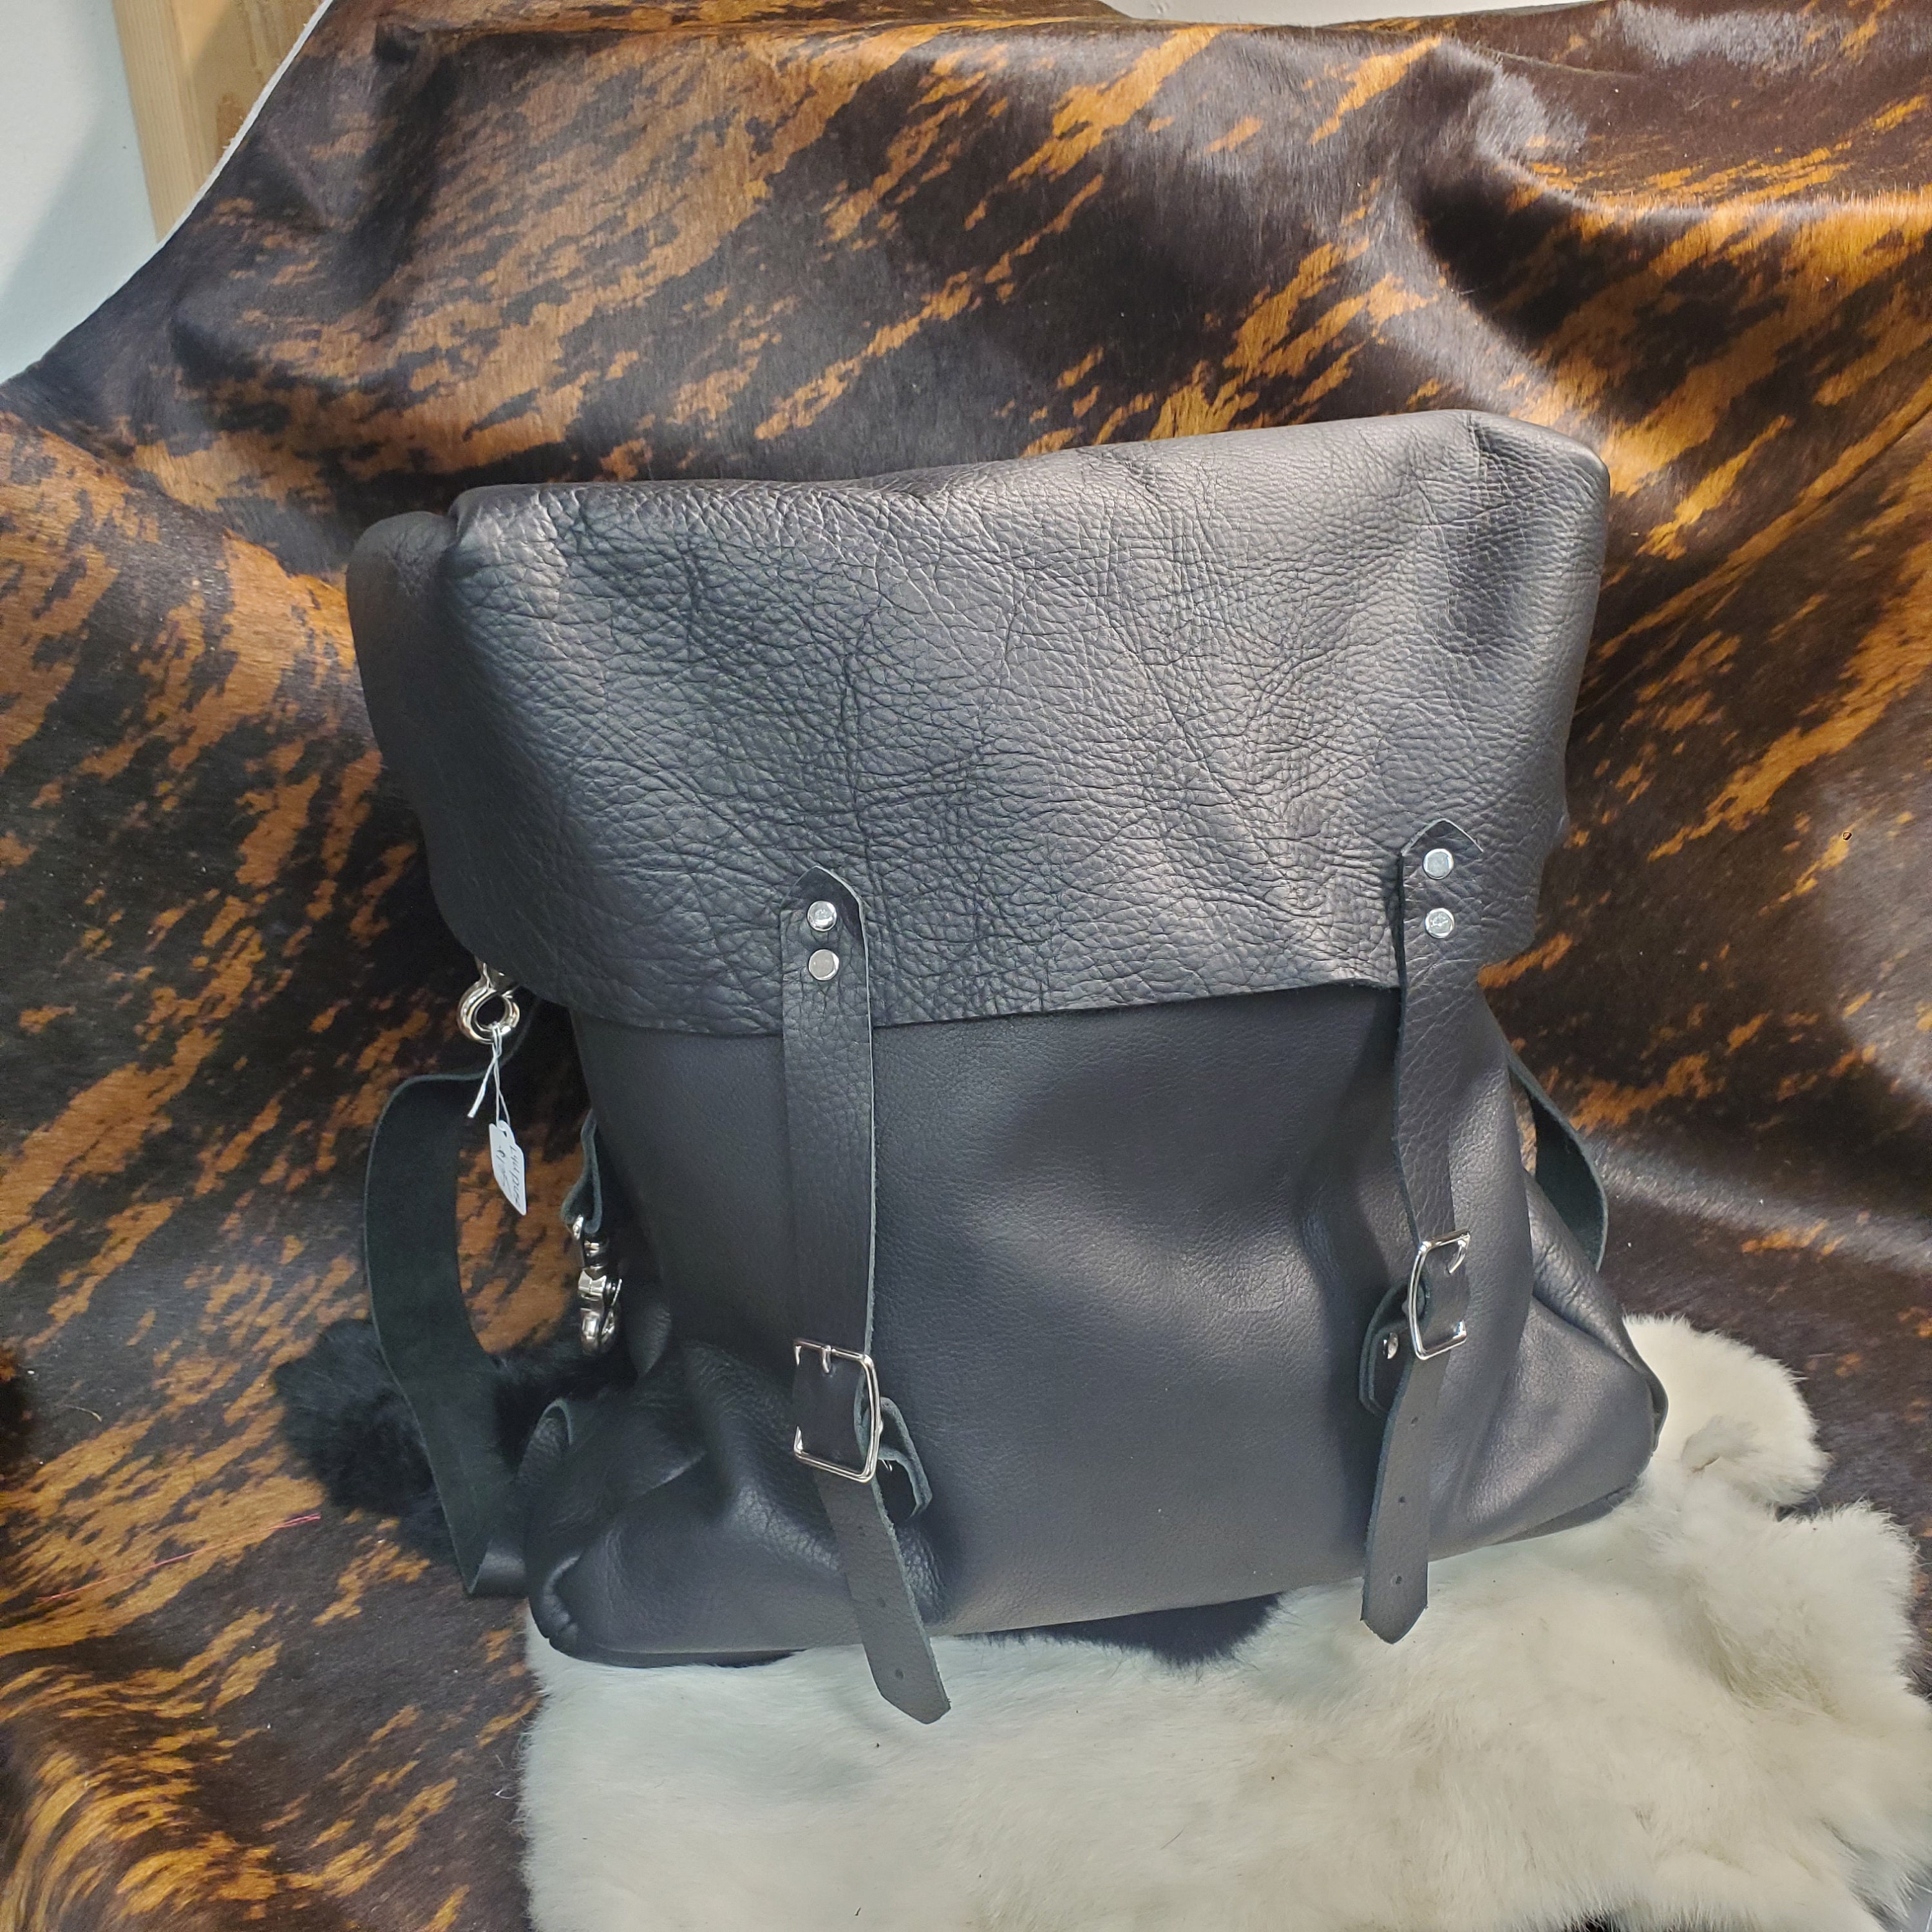 backpack leather parisian bags